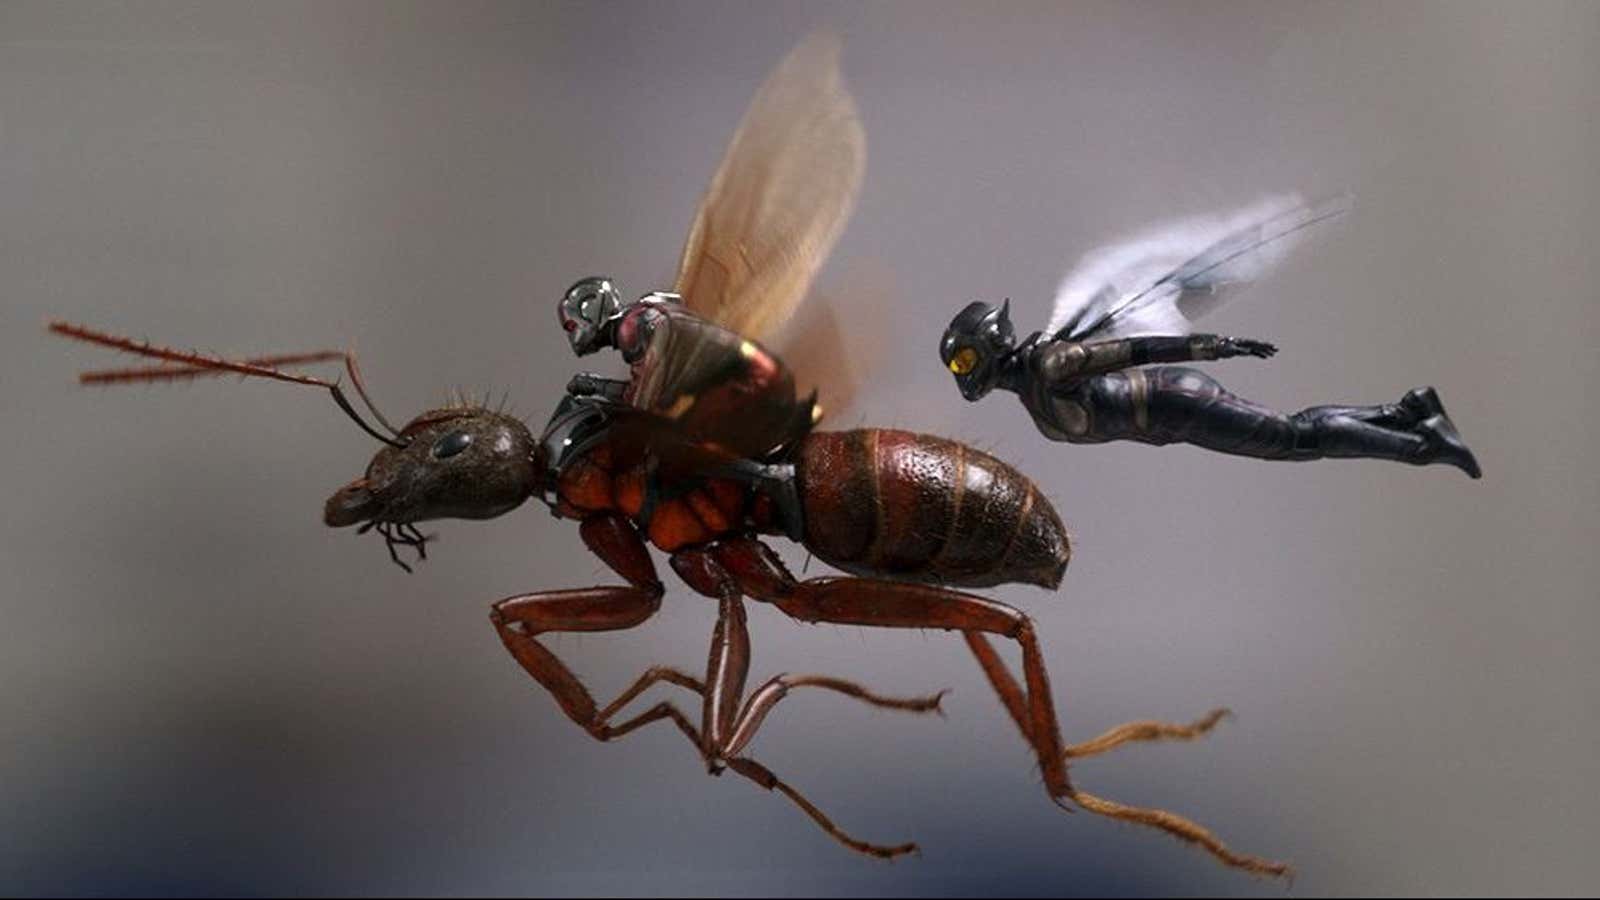 Antman, the Wasp, and an ant.